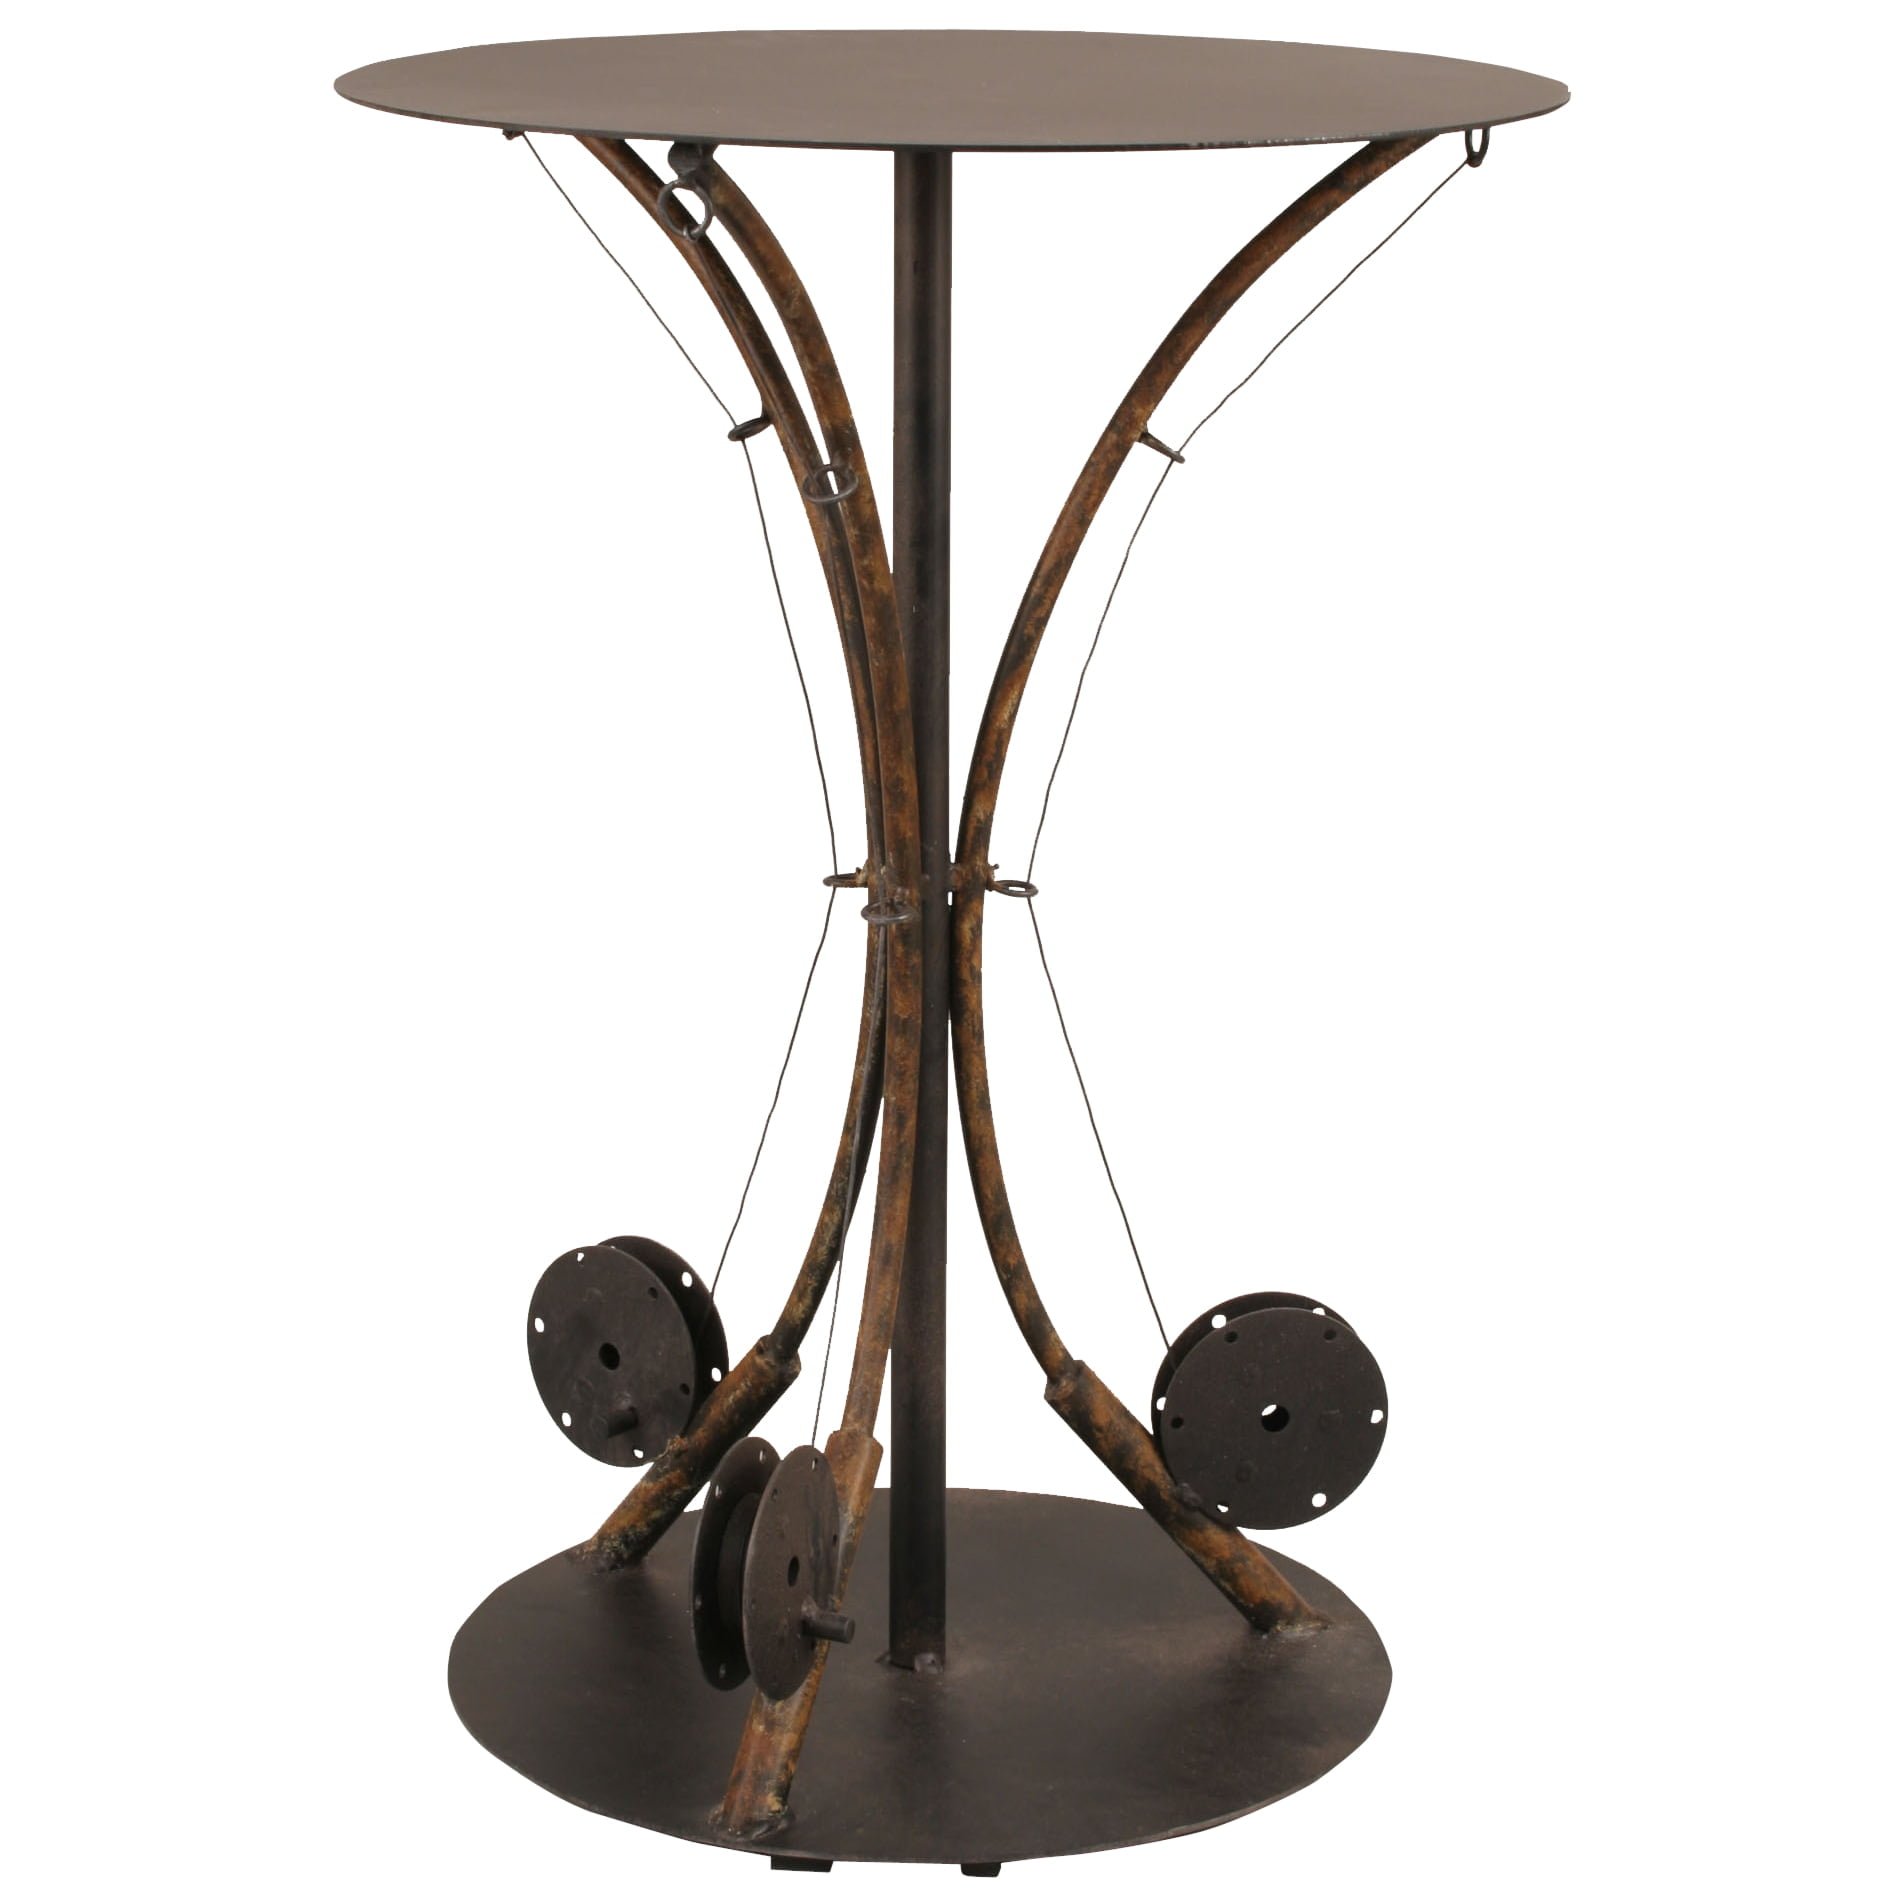 Rust End Table with 3 Fishing Poles